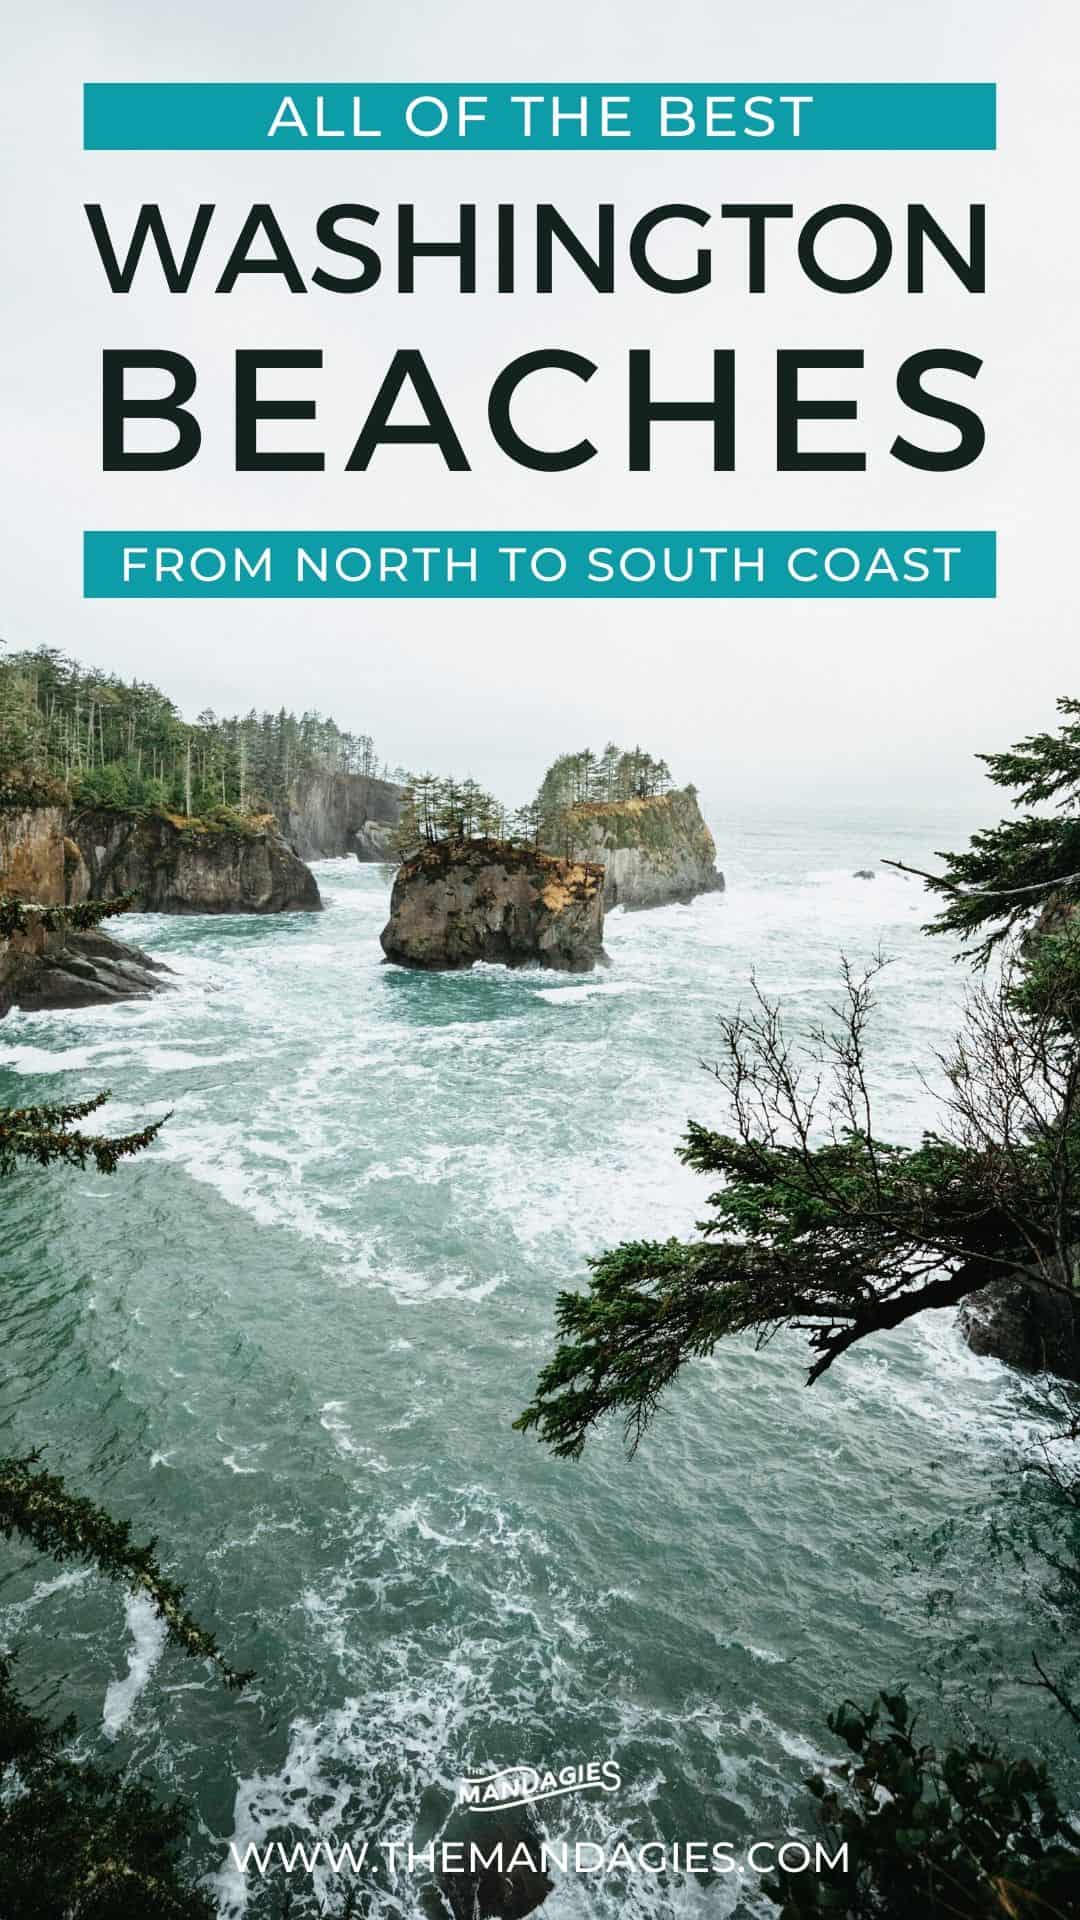 Love the ocean, and live in the Pacific Northwest? We're sharing the best beaches in Washington State to explore this weekend, including best activities and cool features of all of them! Save this post for your next Washington Beaches trip, and maybe even make it a road trip around the Olympic Peninsula! #rialtobeach #Capeflattery #washingtonstate #washington #oceanshores #lapush #olympicnationalpark #olympicpeninsula #PNW #pacificnorthwest